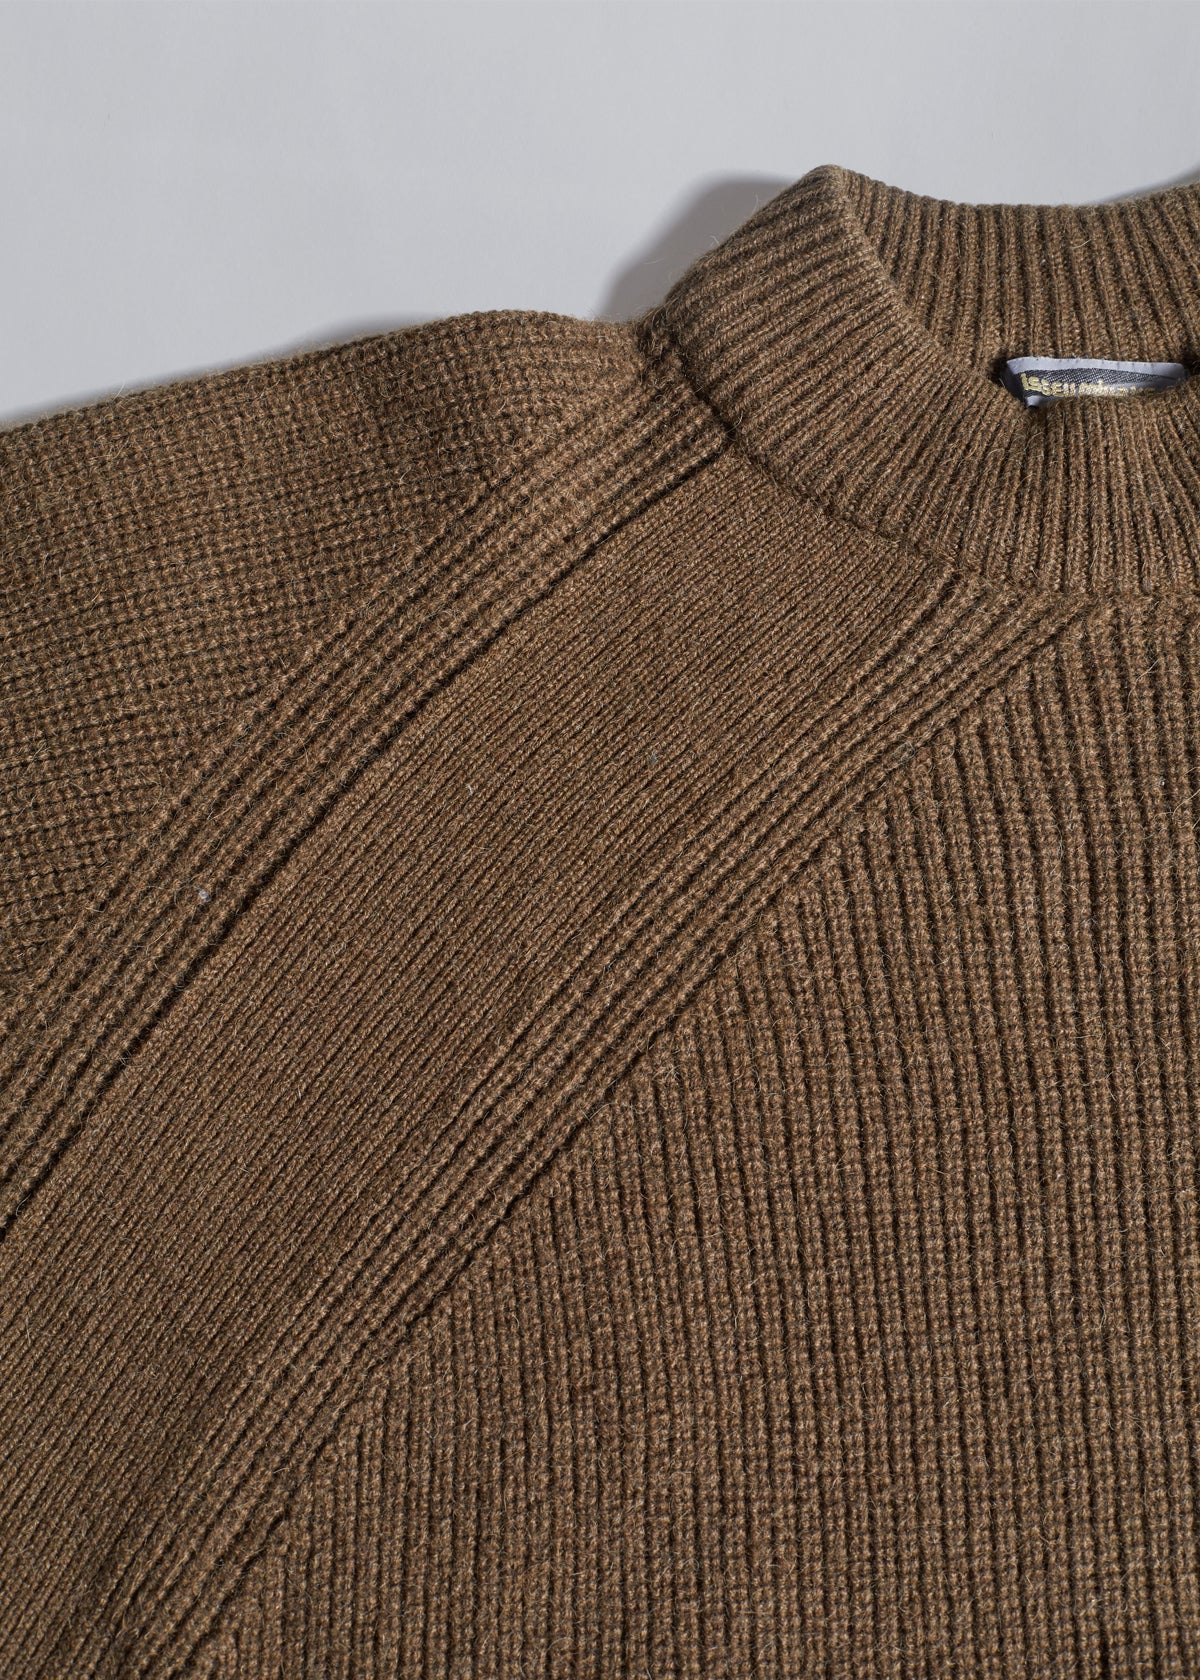 Double Lines Wool Jumper 1980's - Medium - The Archivist Store